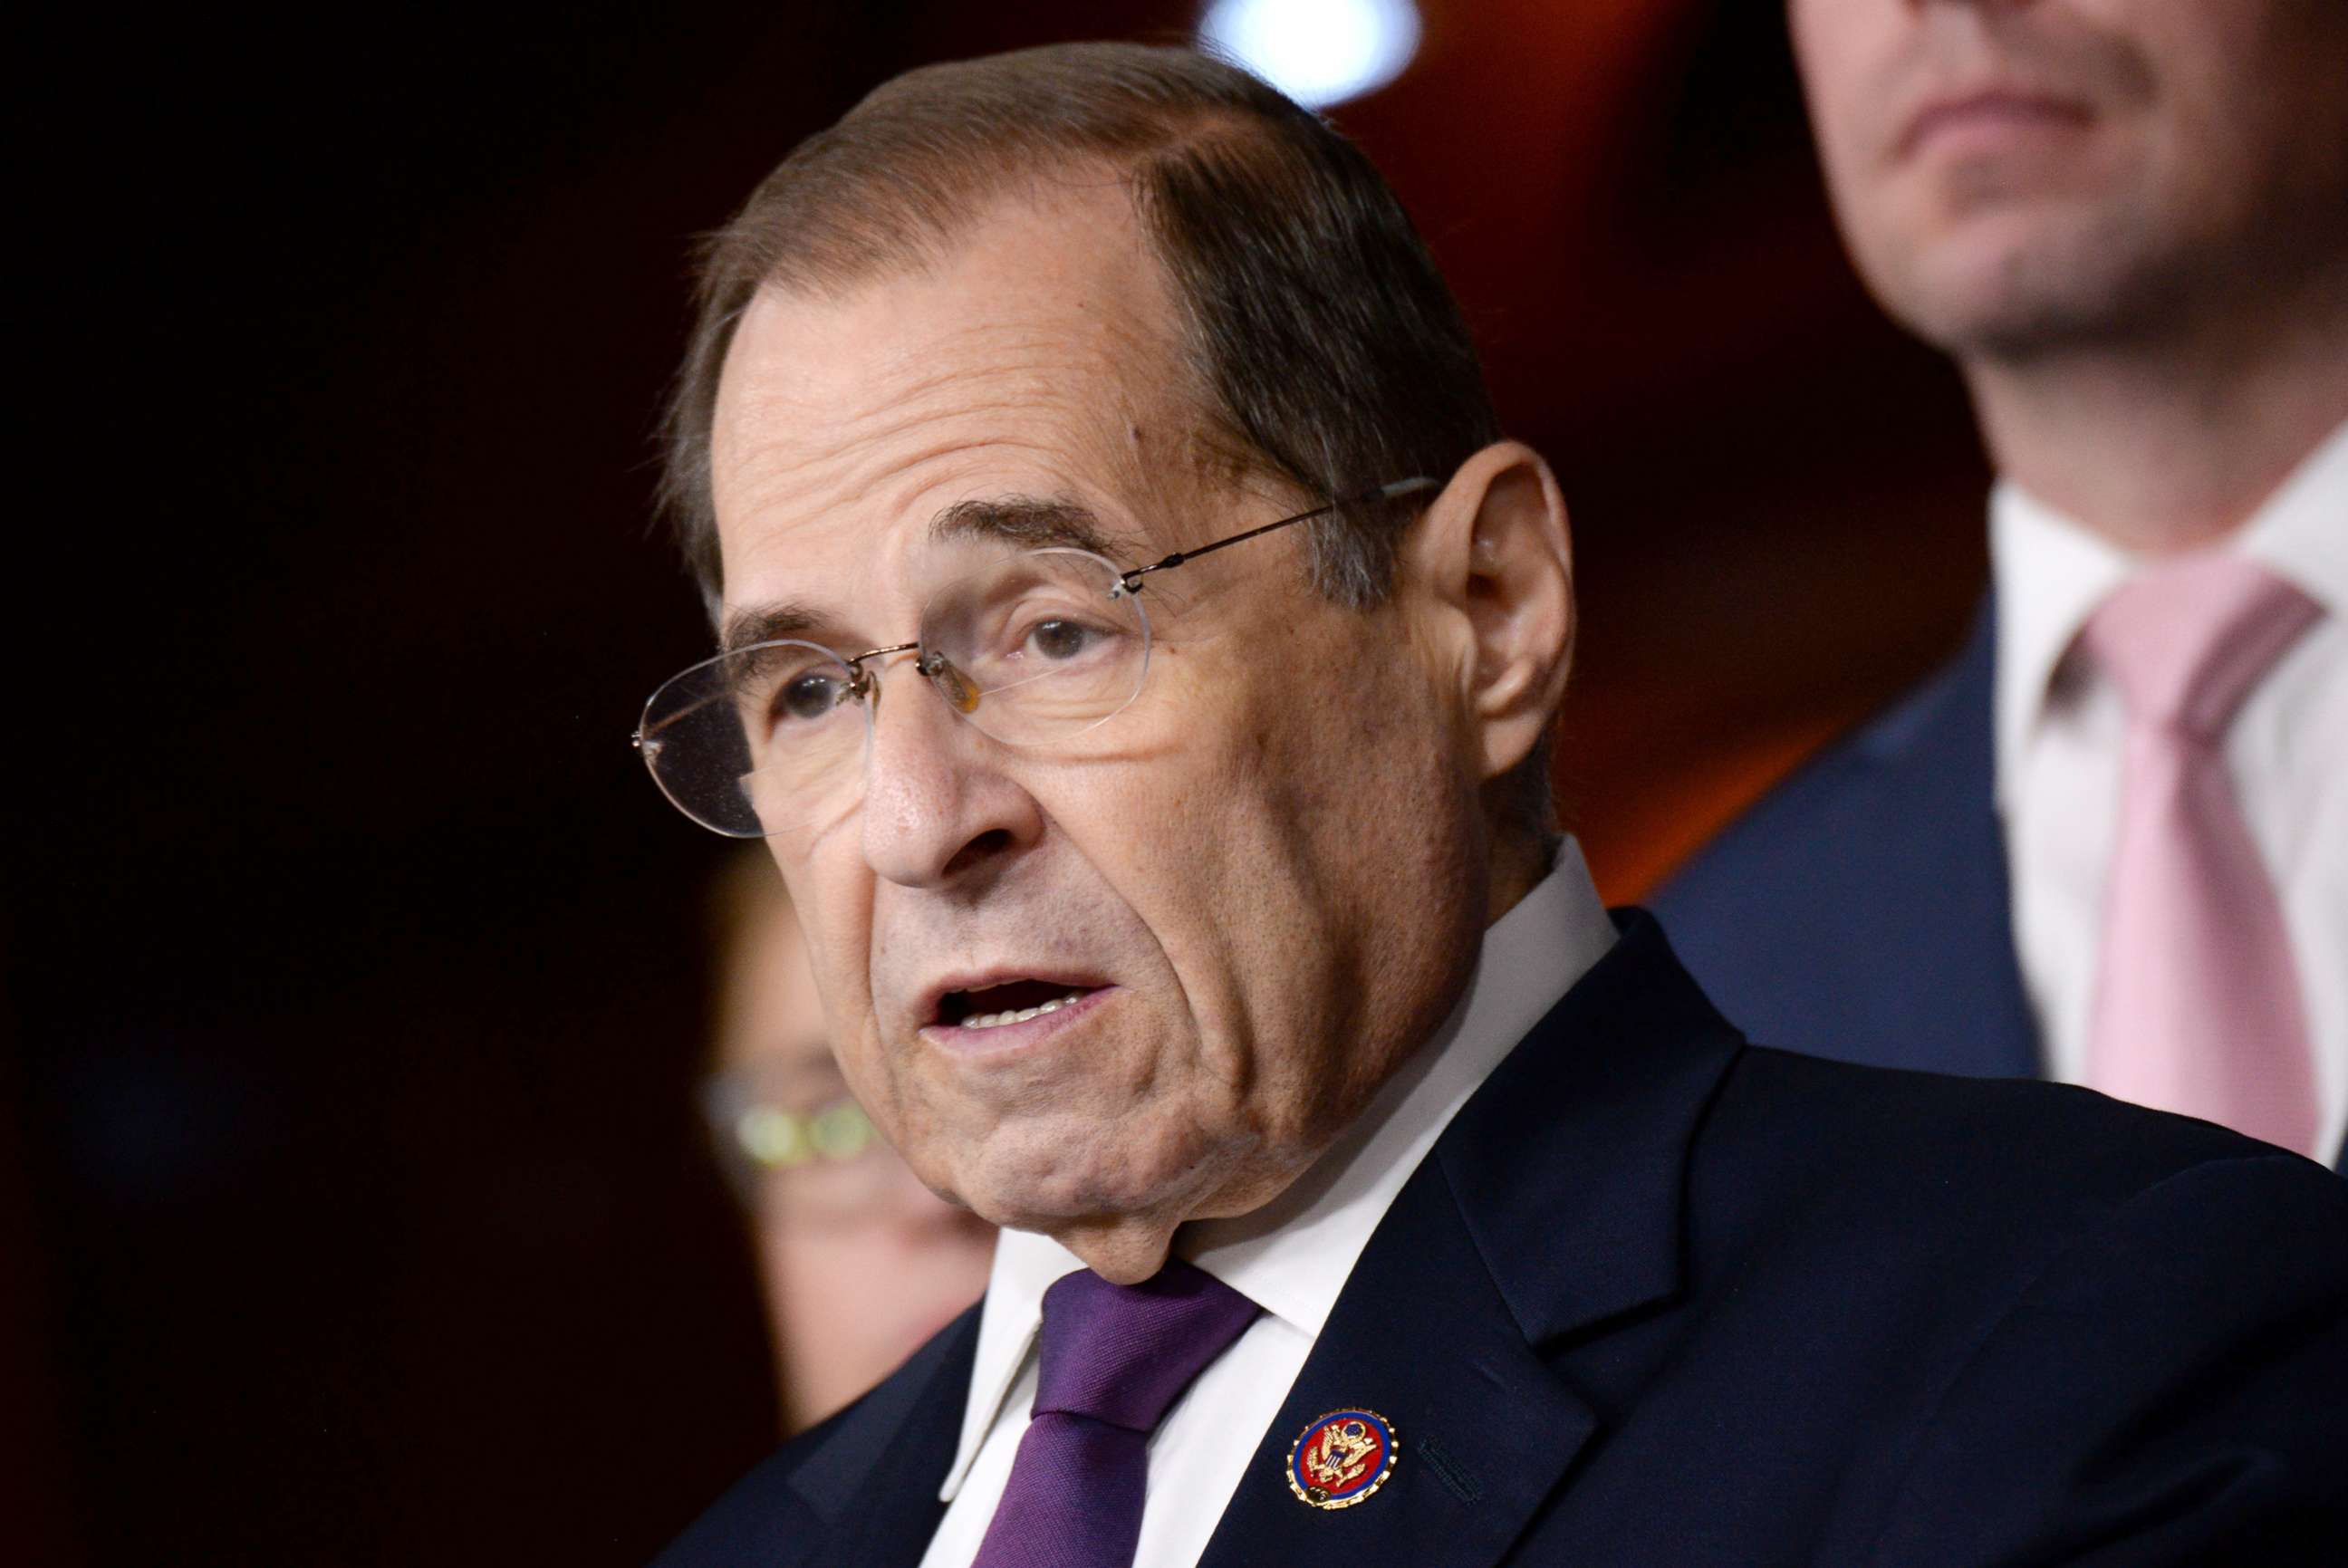 PHOTO: House Judiciary Committee Chairman Jerry Nadler (D-NY) holds a news conference to discuss the Committee's oversight agenda following the Mueller Hearing in Washington D.C., July 26, 2019. 